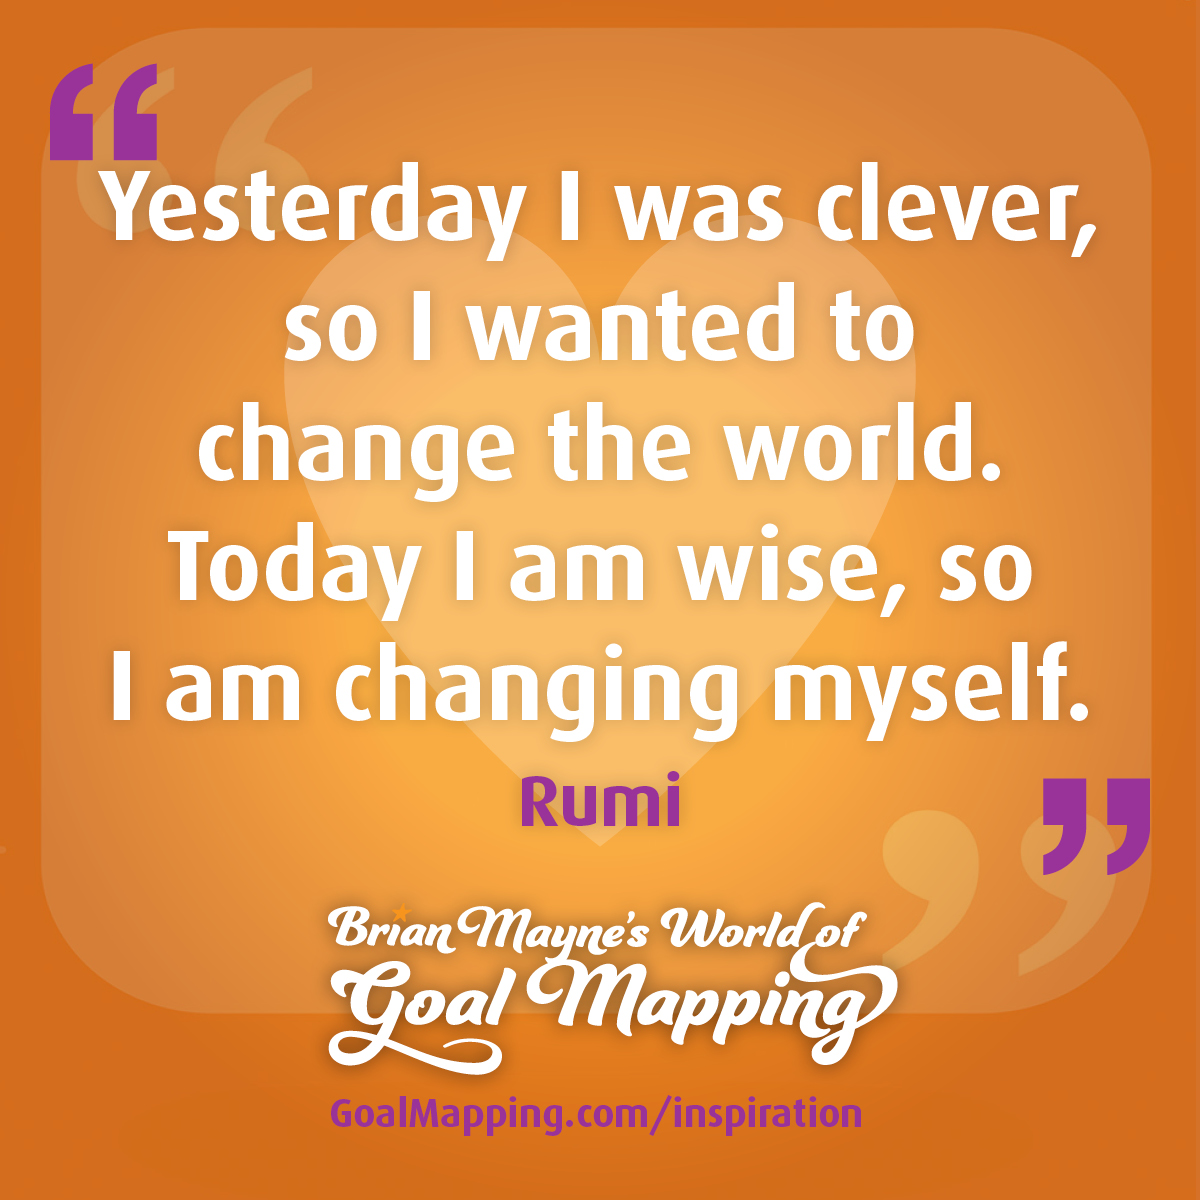 "Yesterday I was clever, so I wanted to change the world. Today I am wise, so I am changing myself." Rumi